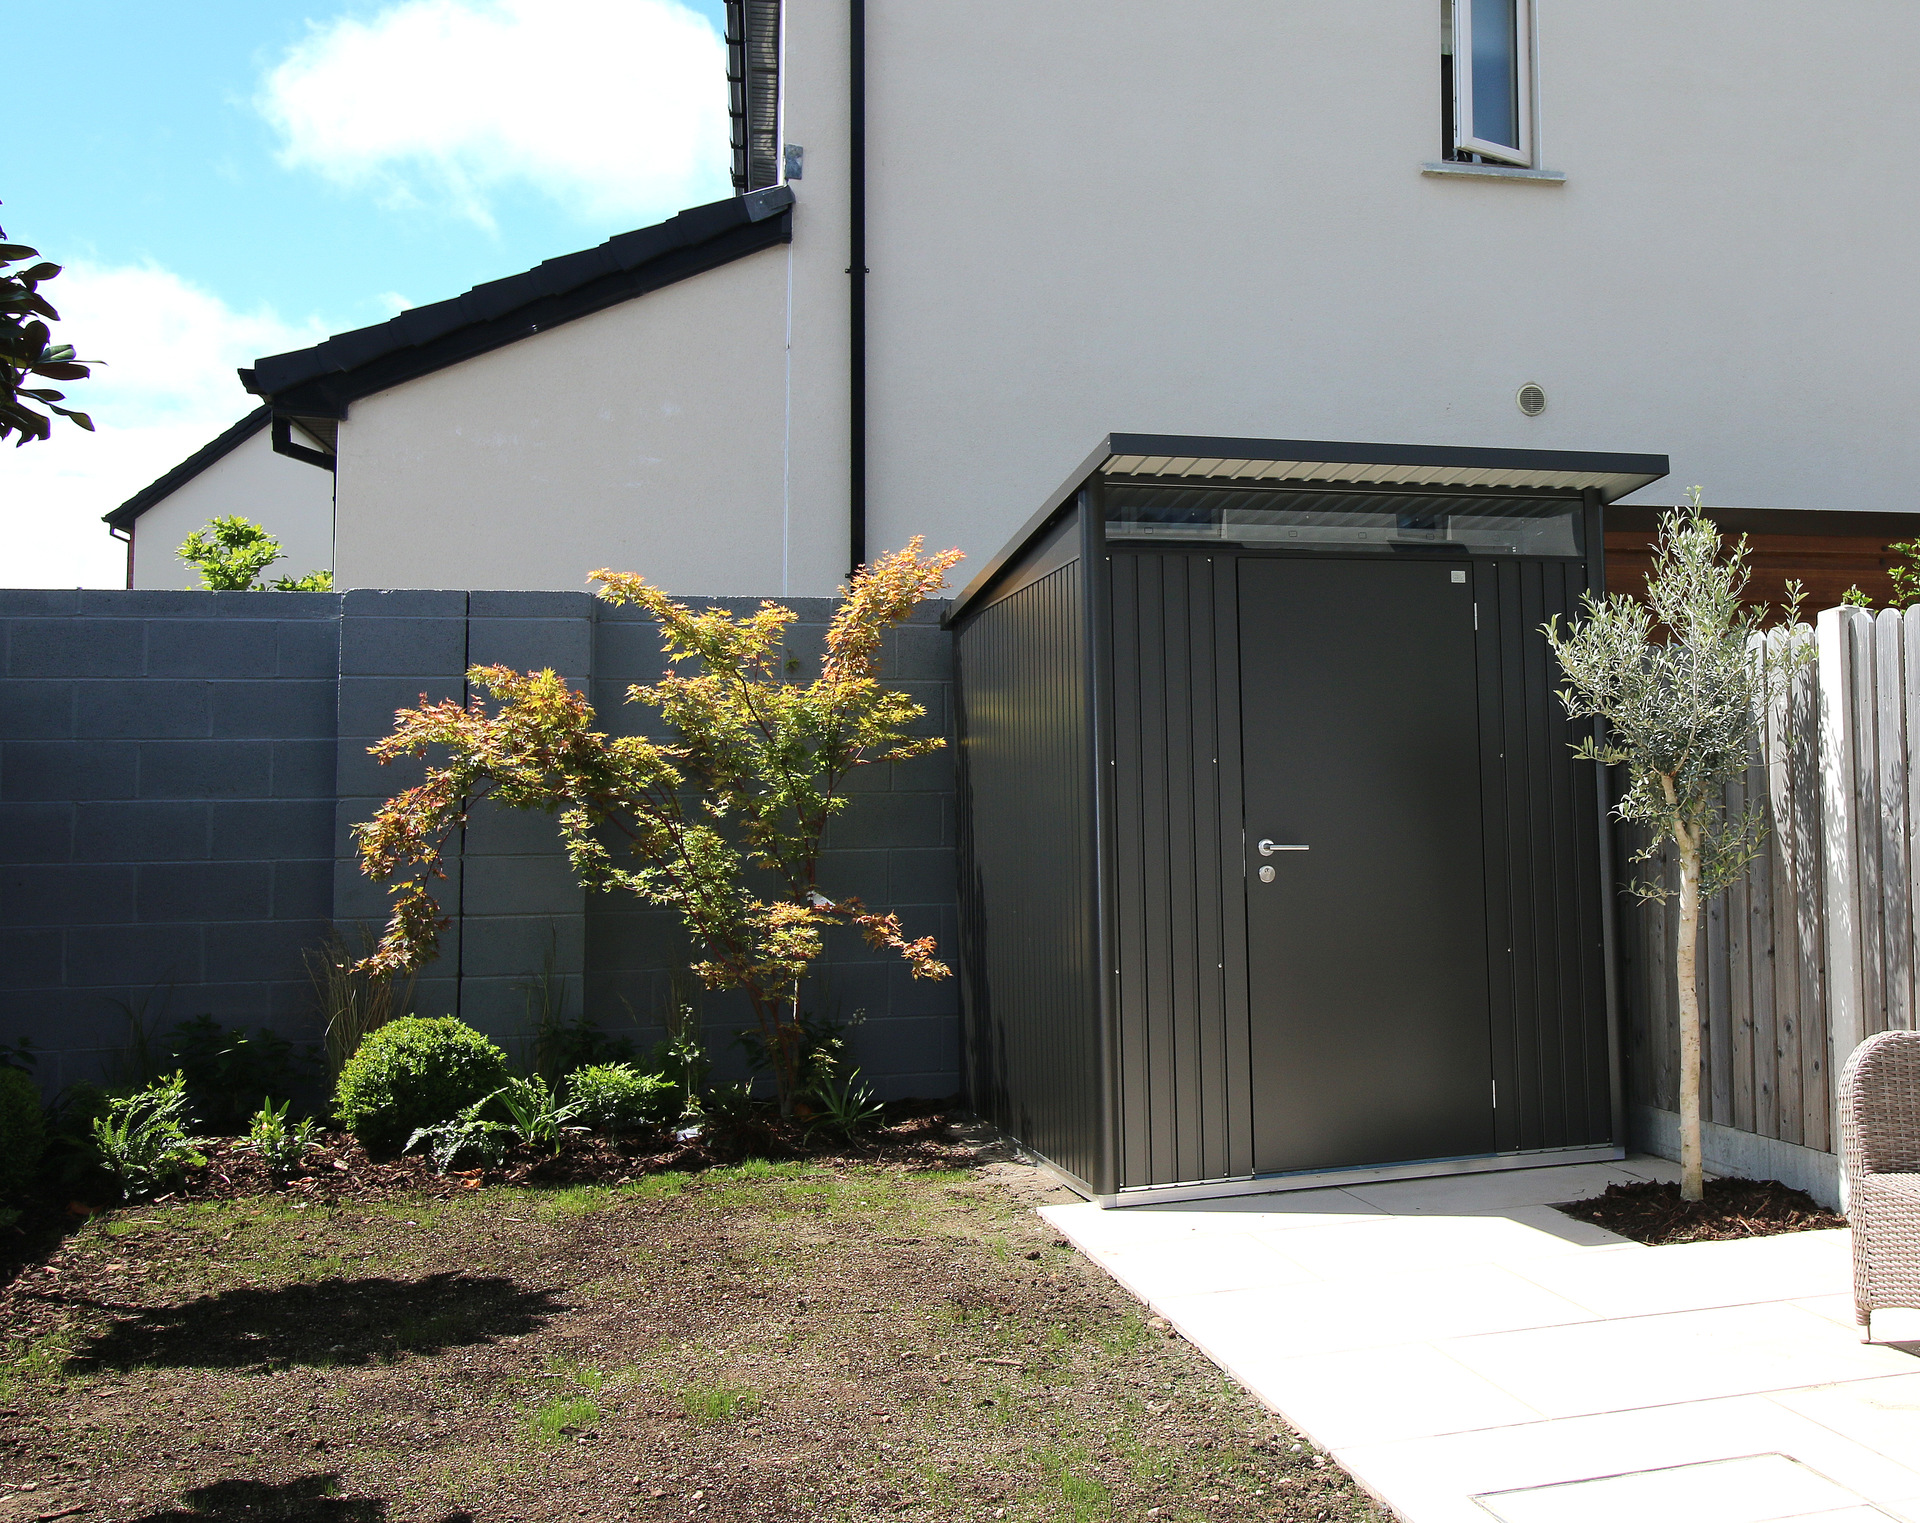 Biohort AvantGarde A2 Garden shed in metallic dark grey, a stunning example of contemporary garden shed design & build quality. Supplied + Fitted in Dublin 12.